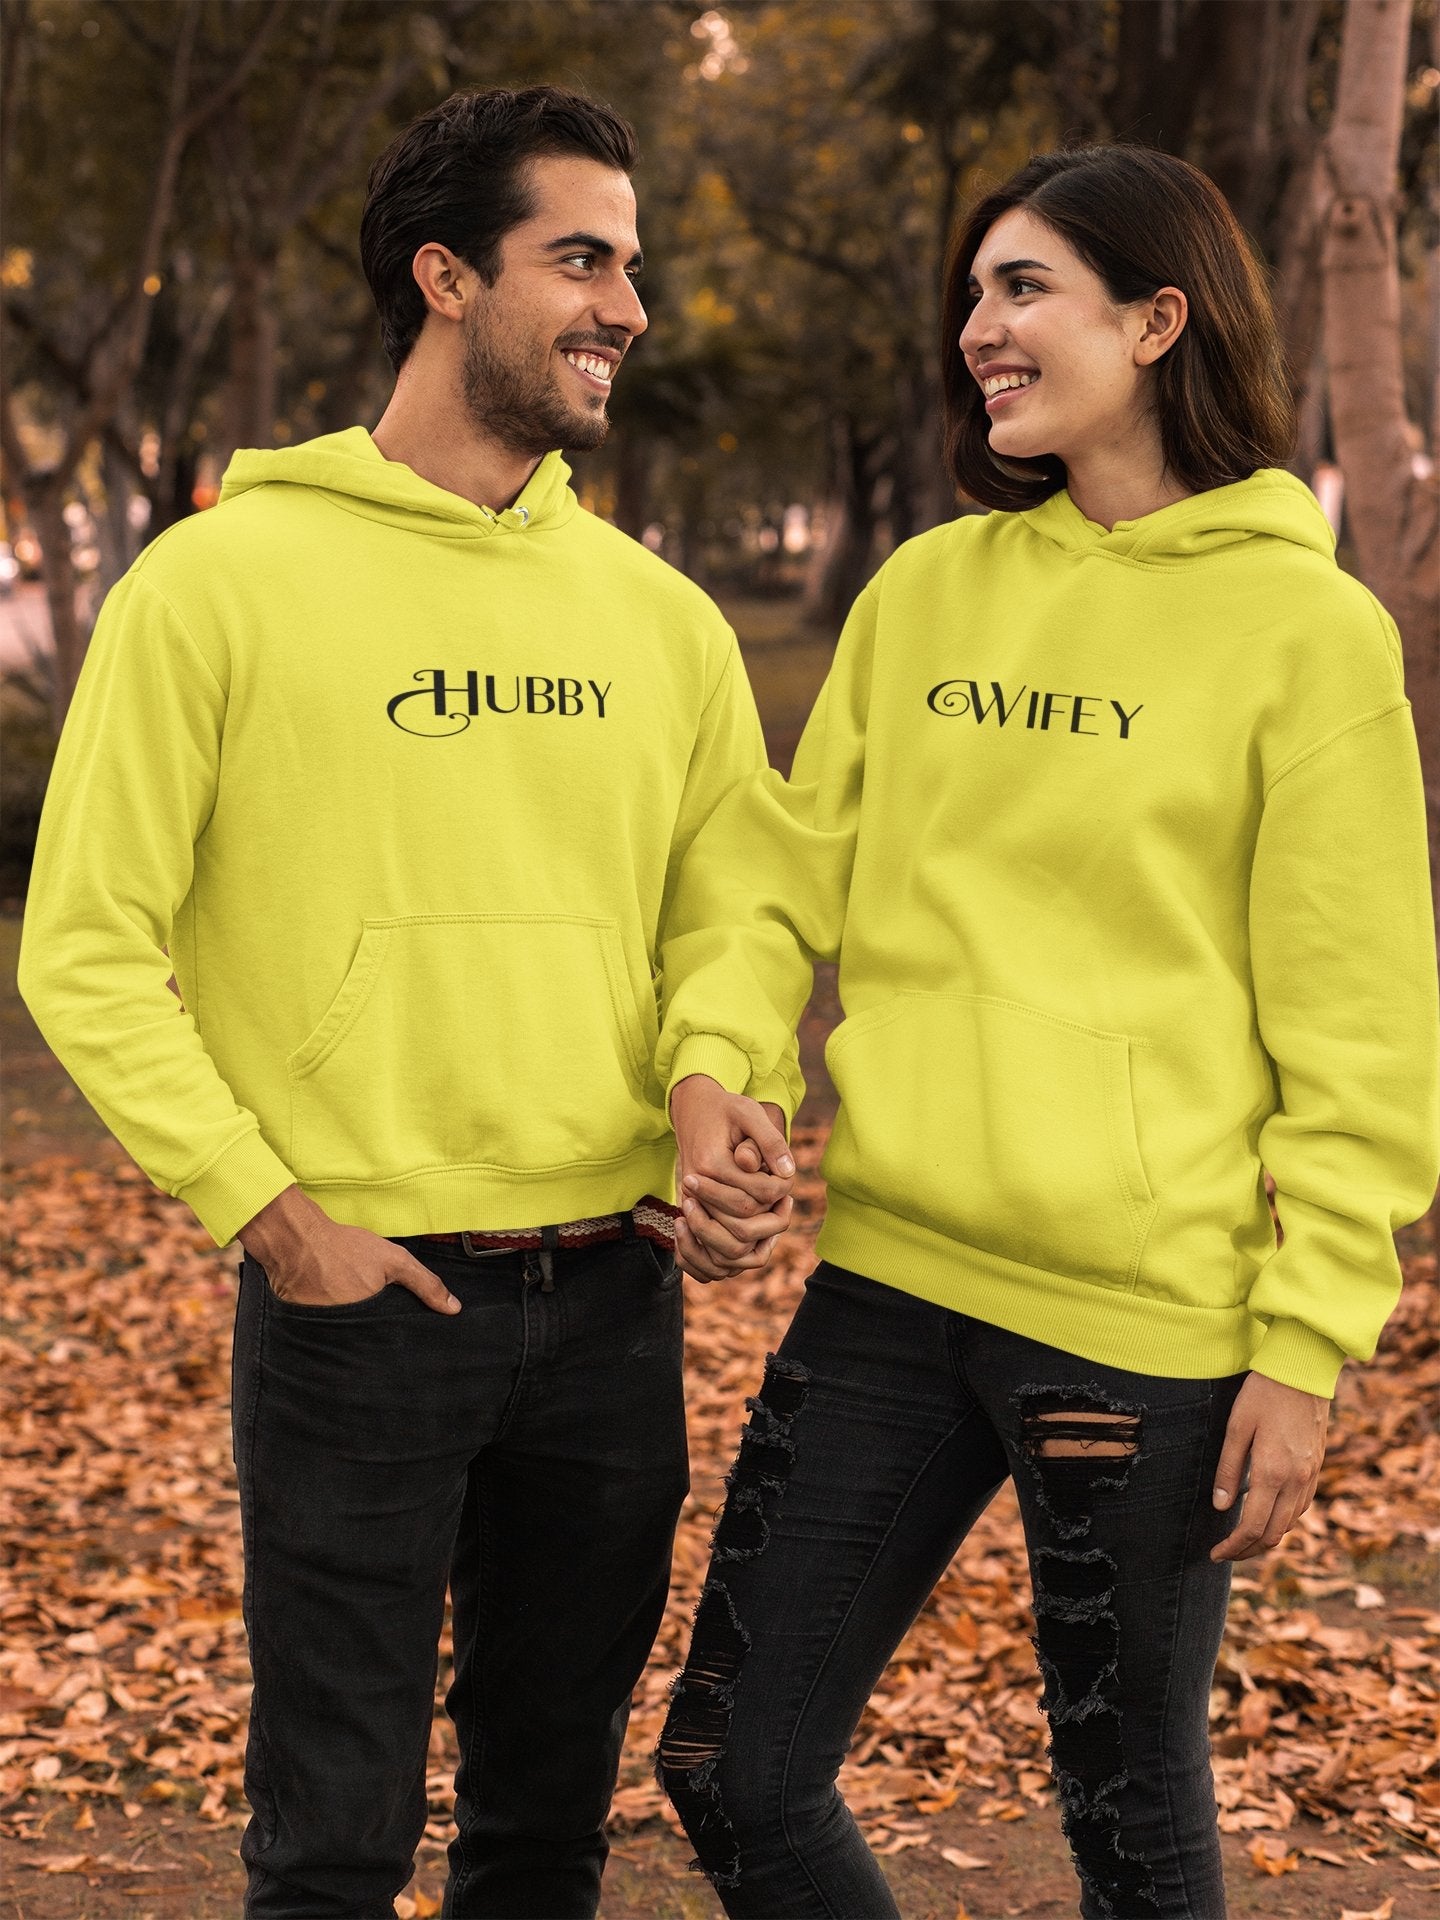 Hubby Wifey Couple Hoodie-FunkyTradition - FunkyTradition